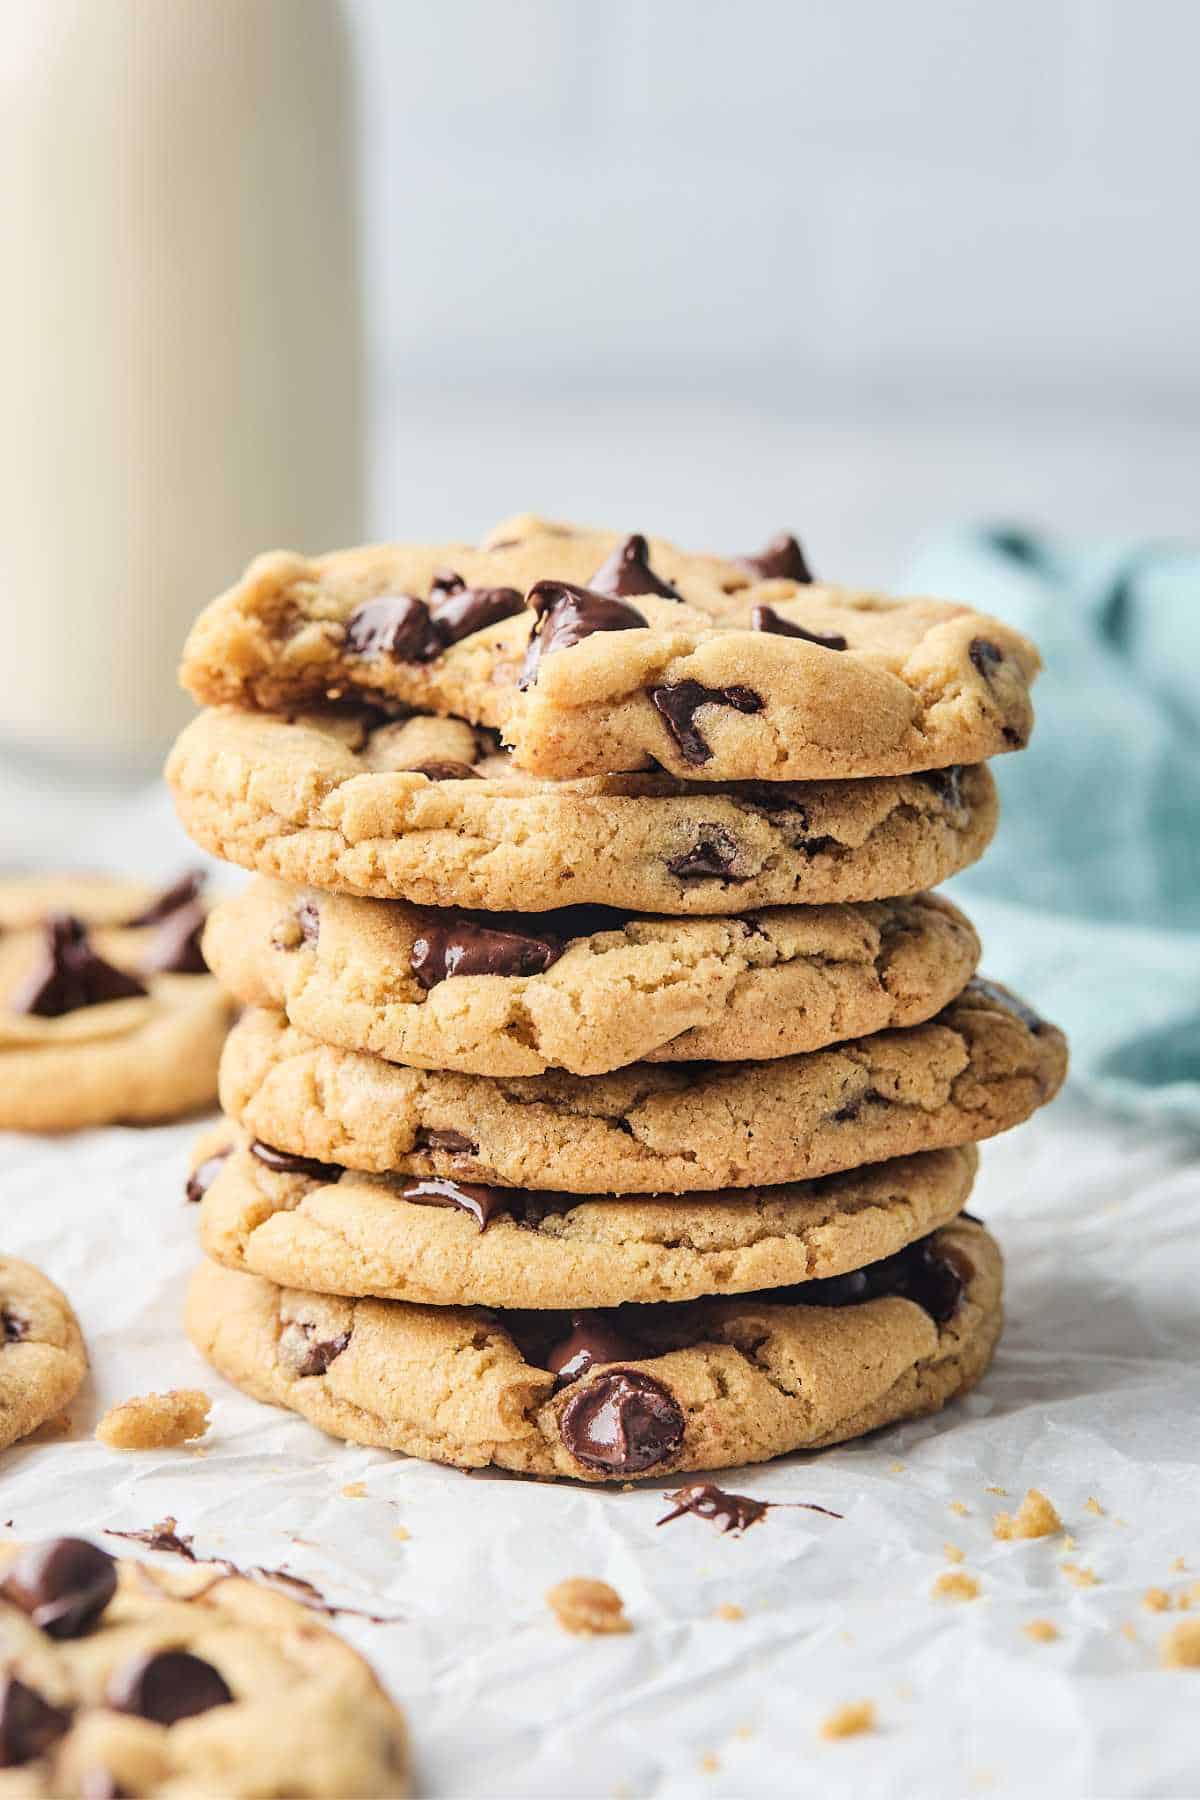 A stack of chewy chocolate chip cookies against white background with pitcher of milk